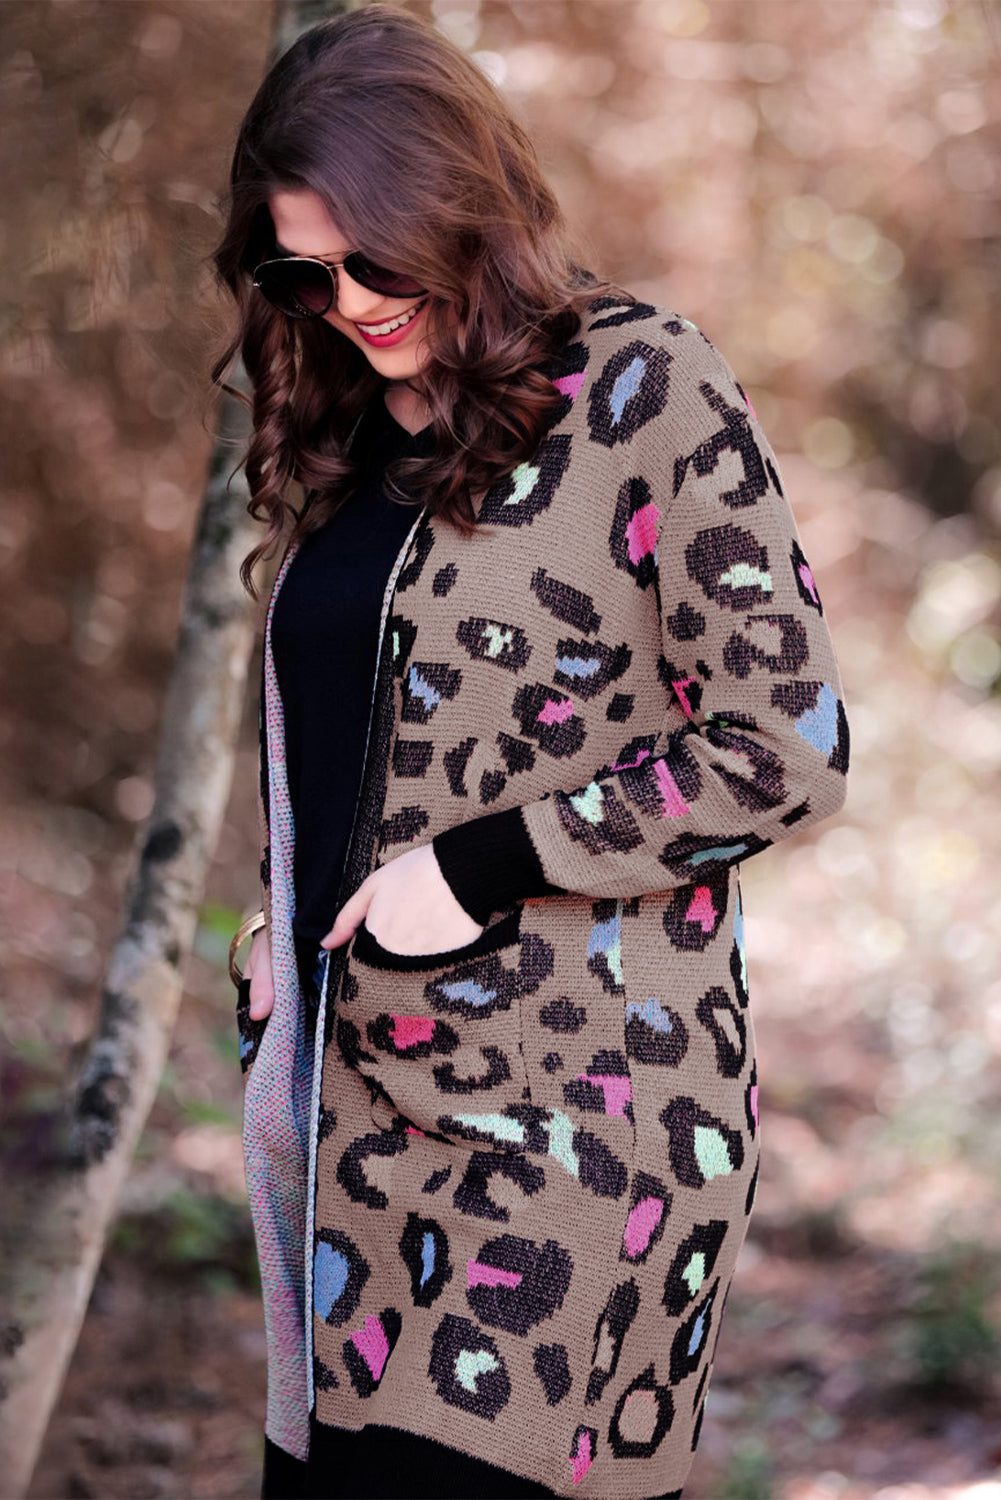 Leopard Contrast Trim Pocketed Open Cardigan